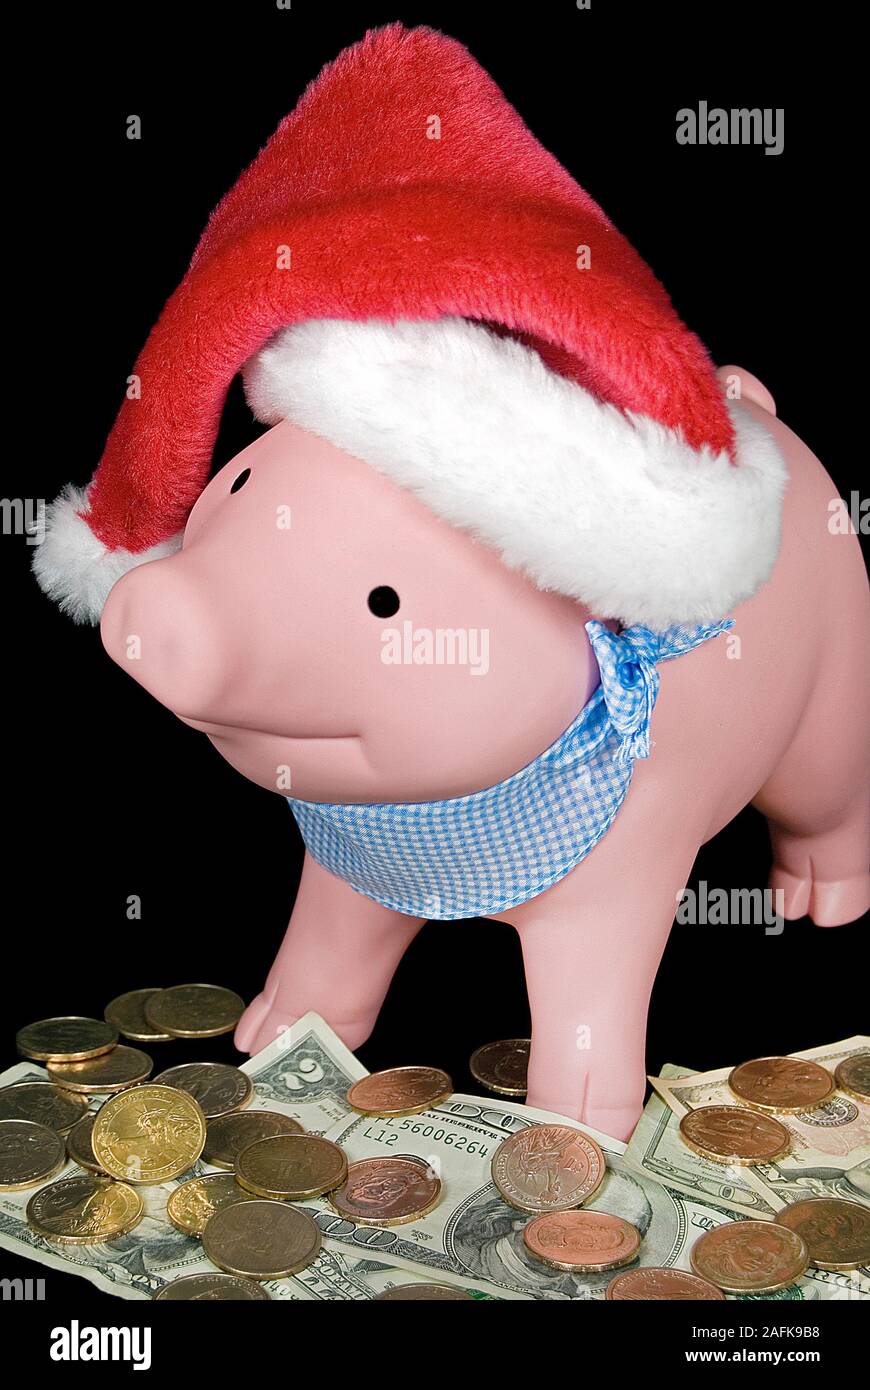 pink pig with Christmas Santa cap on American money Stock Photo